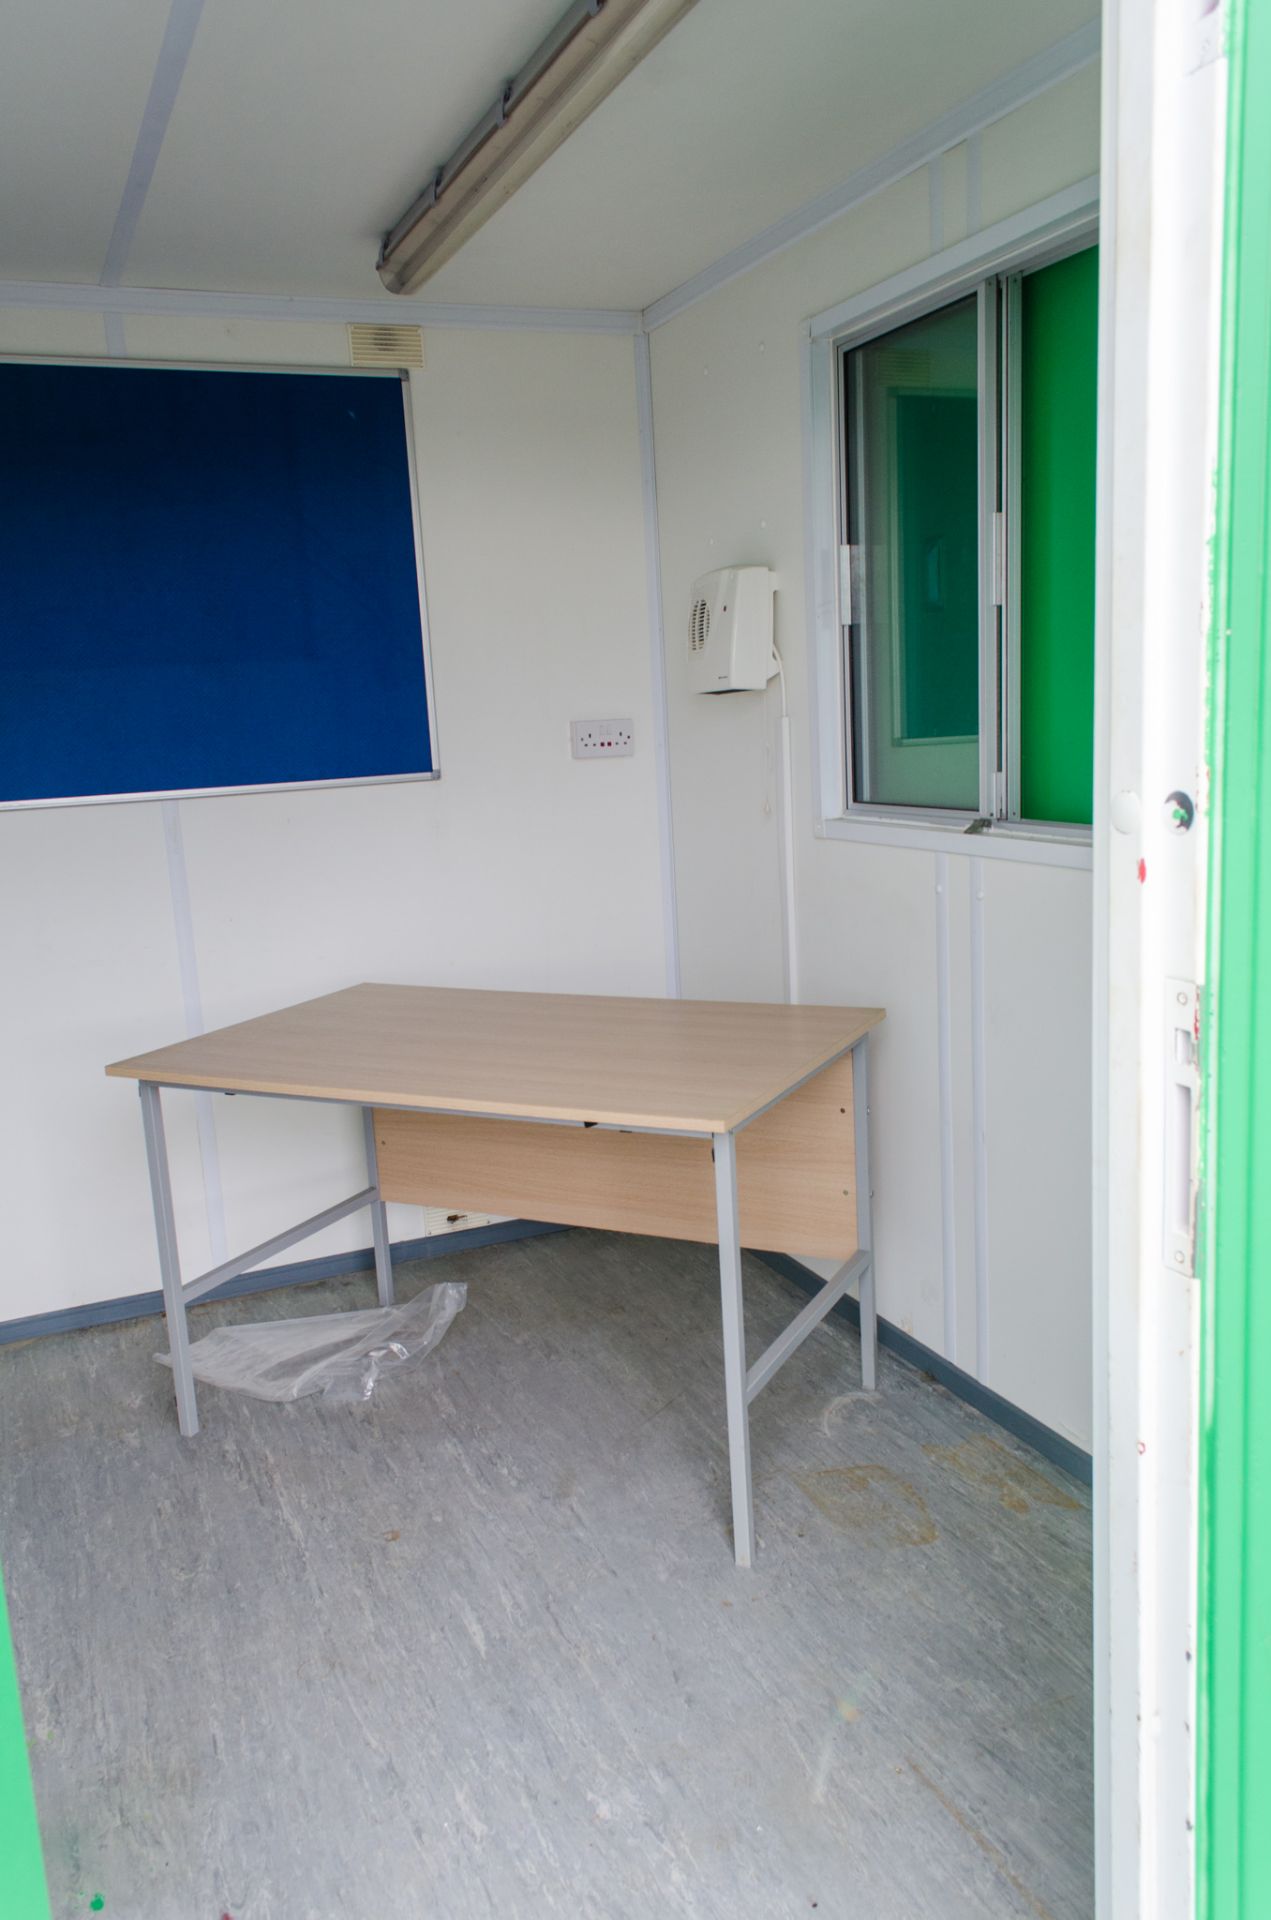 25 ft x 9 ft steel anti vandal welfare site unit Comprising of: Office, Canteen, changing/drying - Image 5 of 11